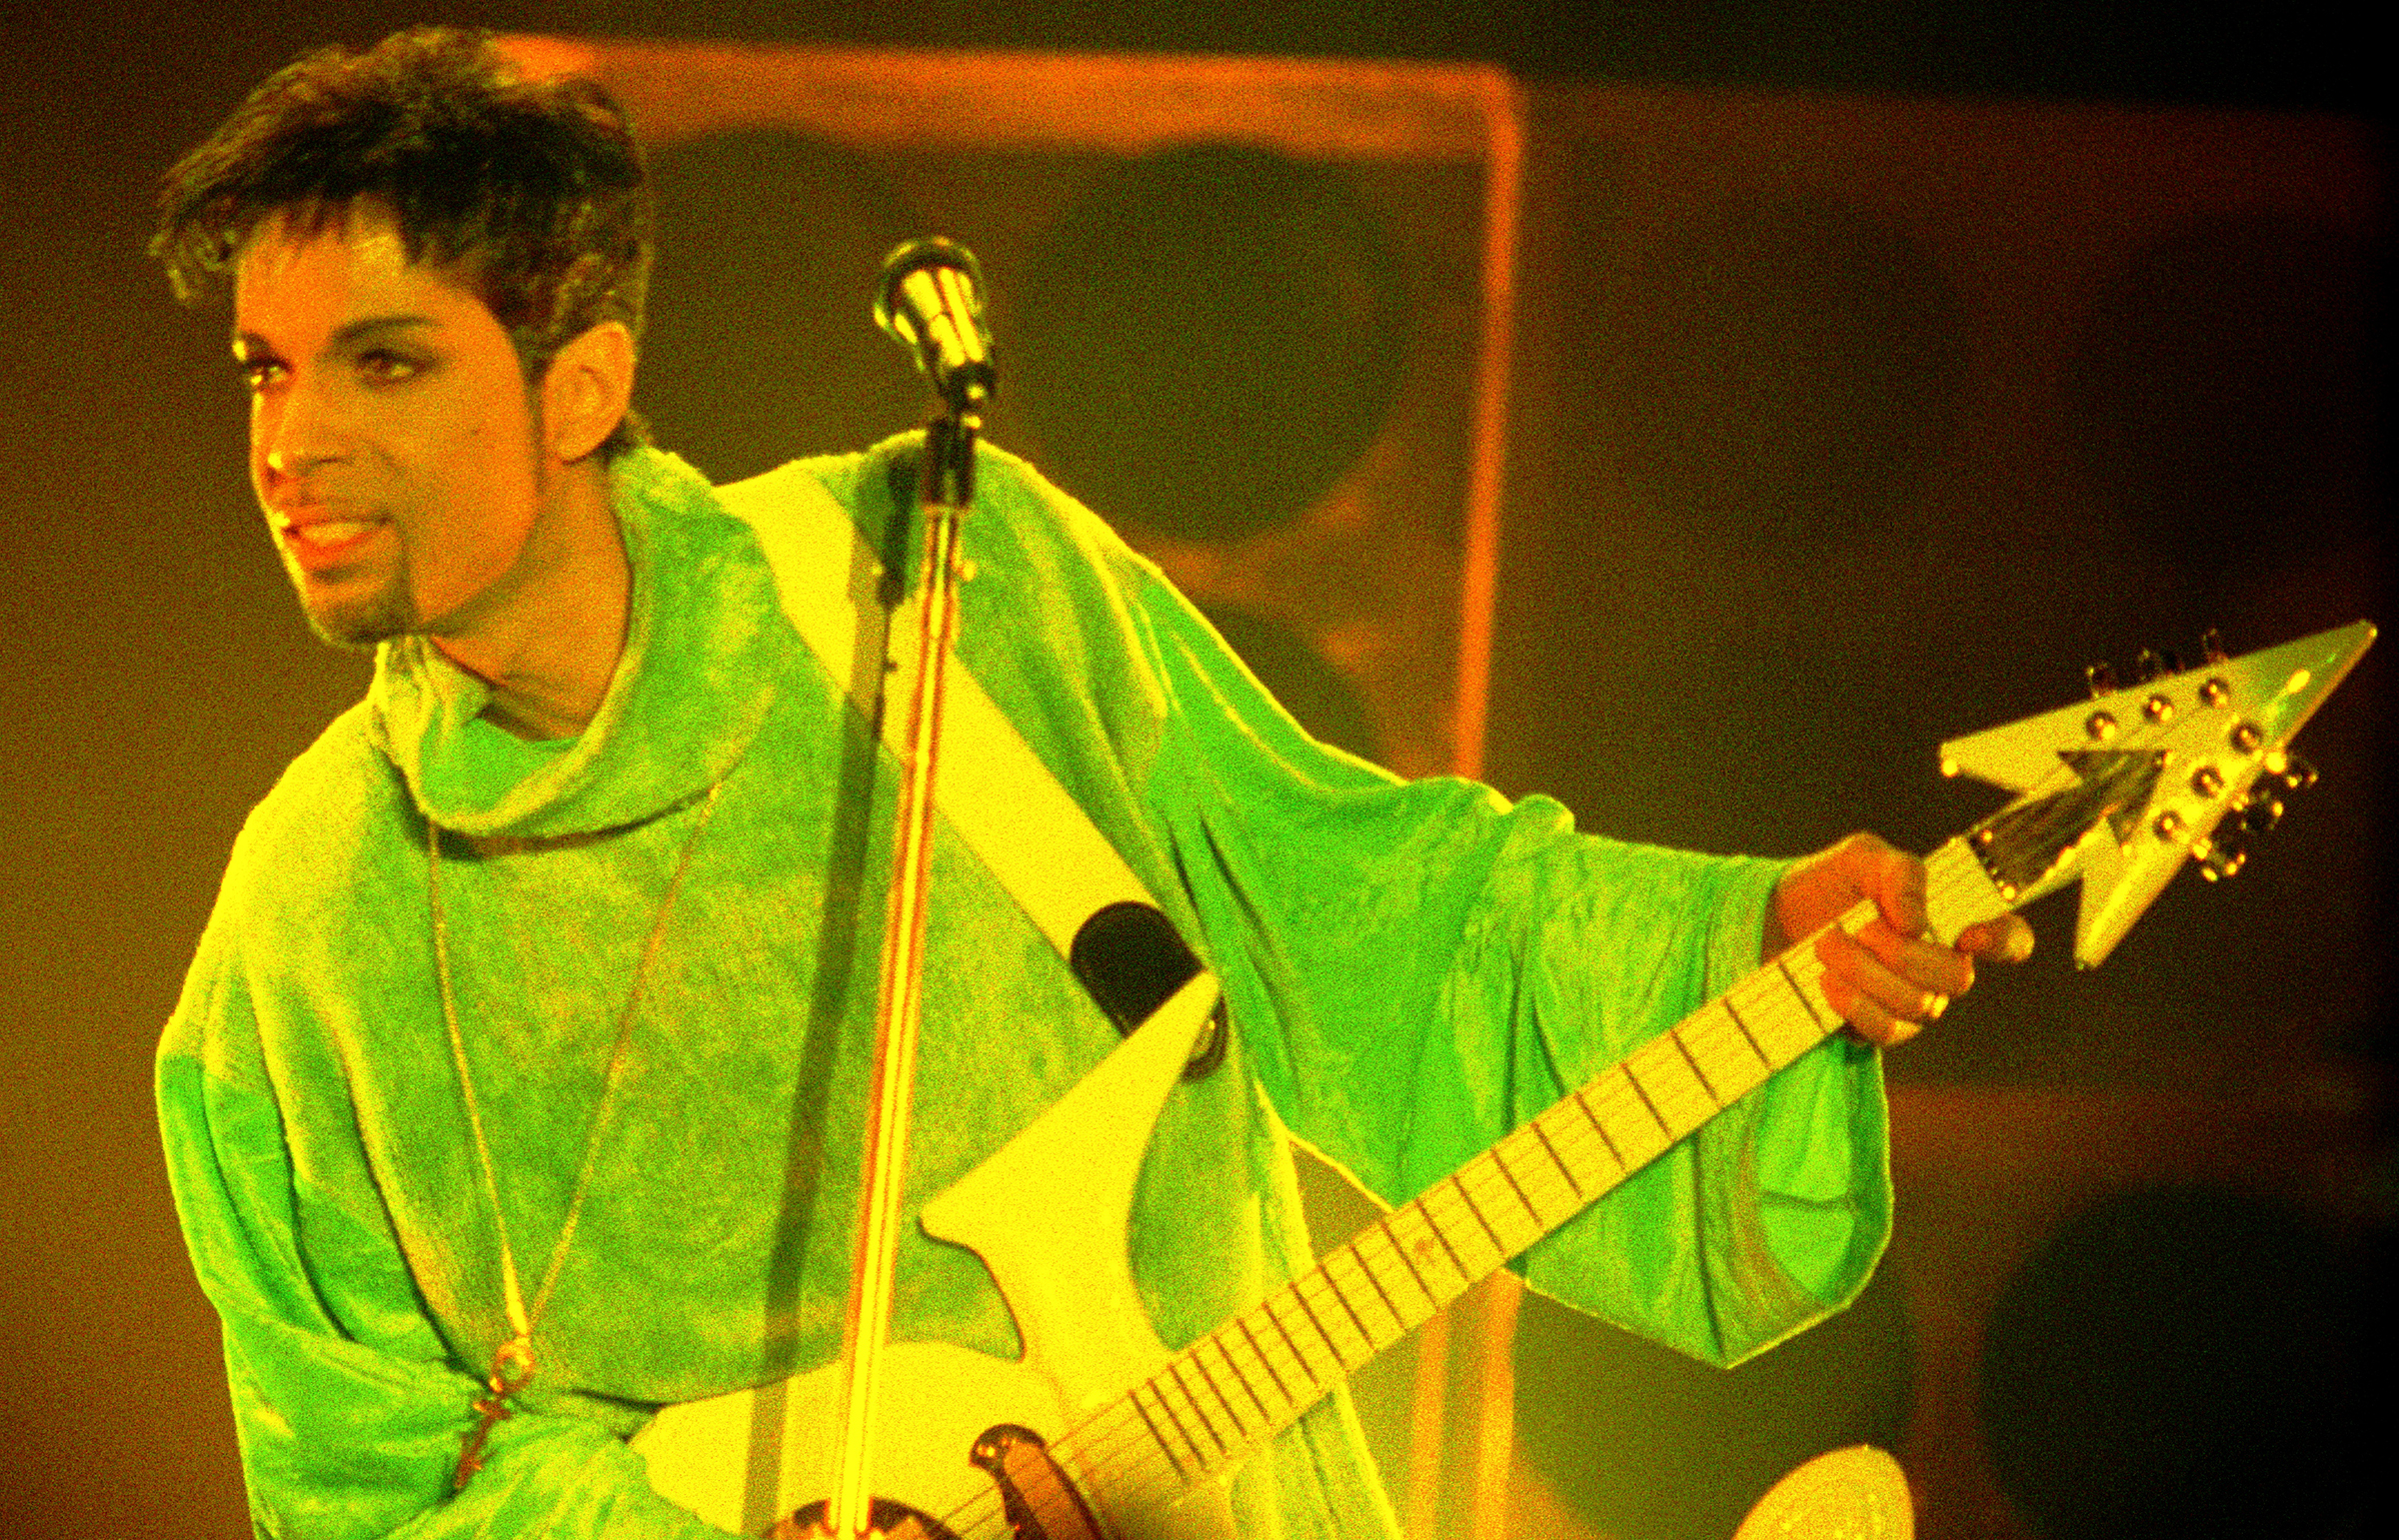 Prince performs at Roseland, New York on January 11, 1997 | Source: Getty Images